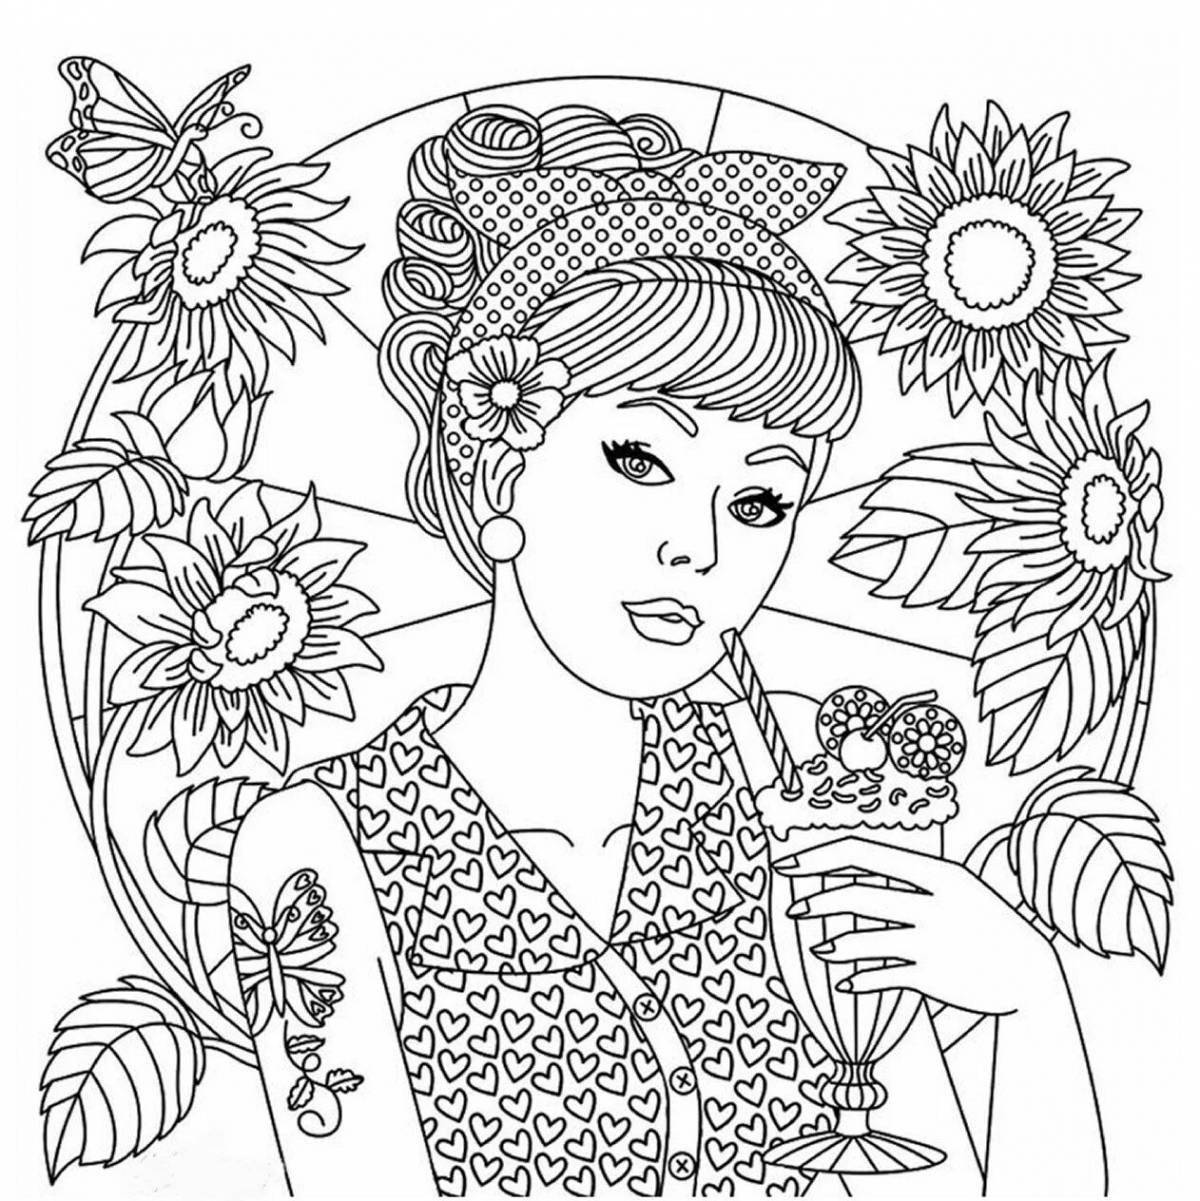 Refreshing anti-stress coloring book for women